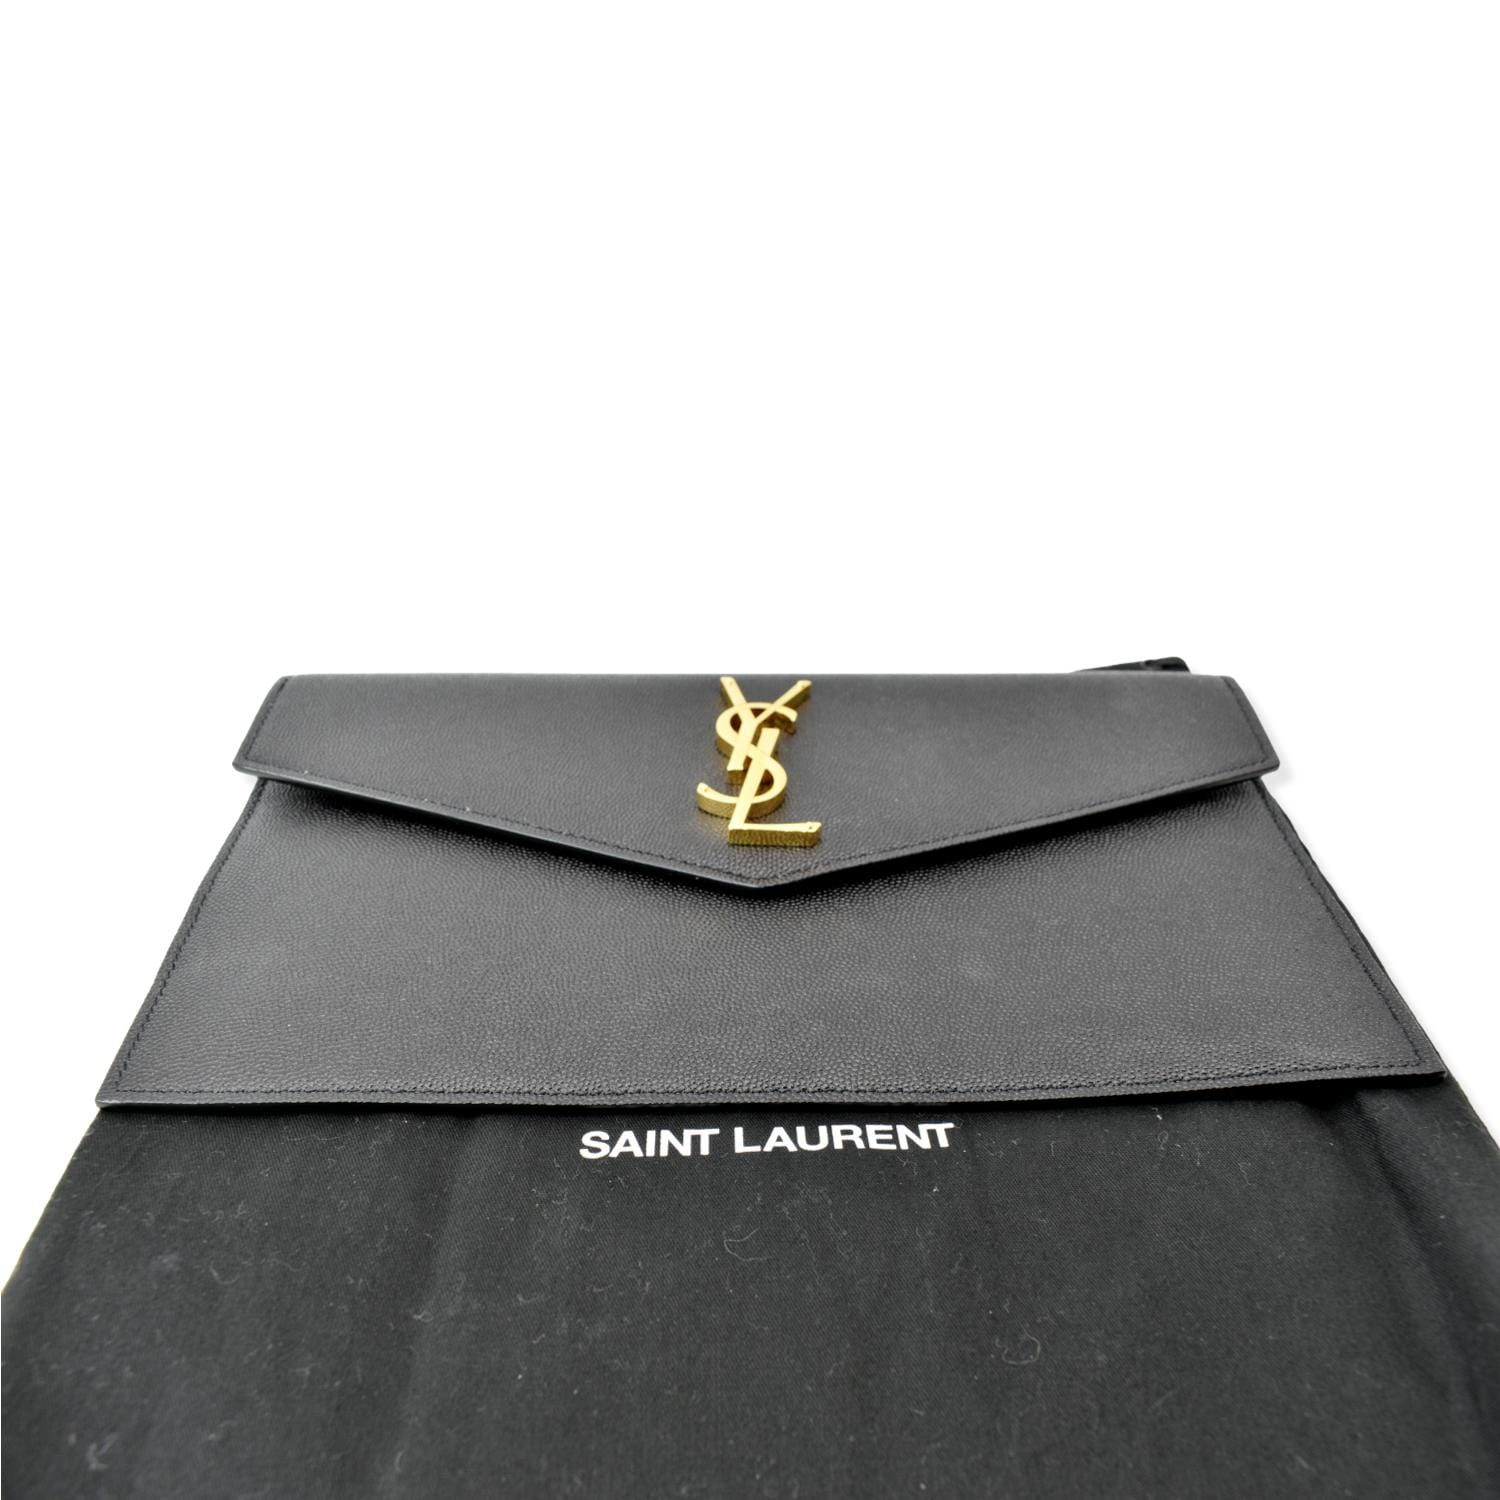 Two Saint Laurent Uptown pouches just landed in the shop! 😍 Both